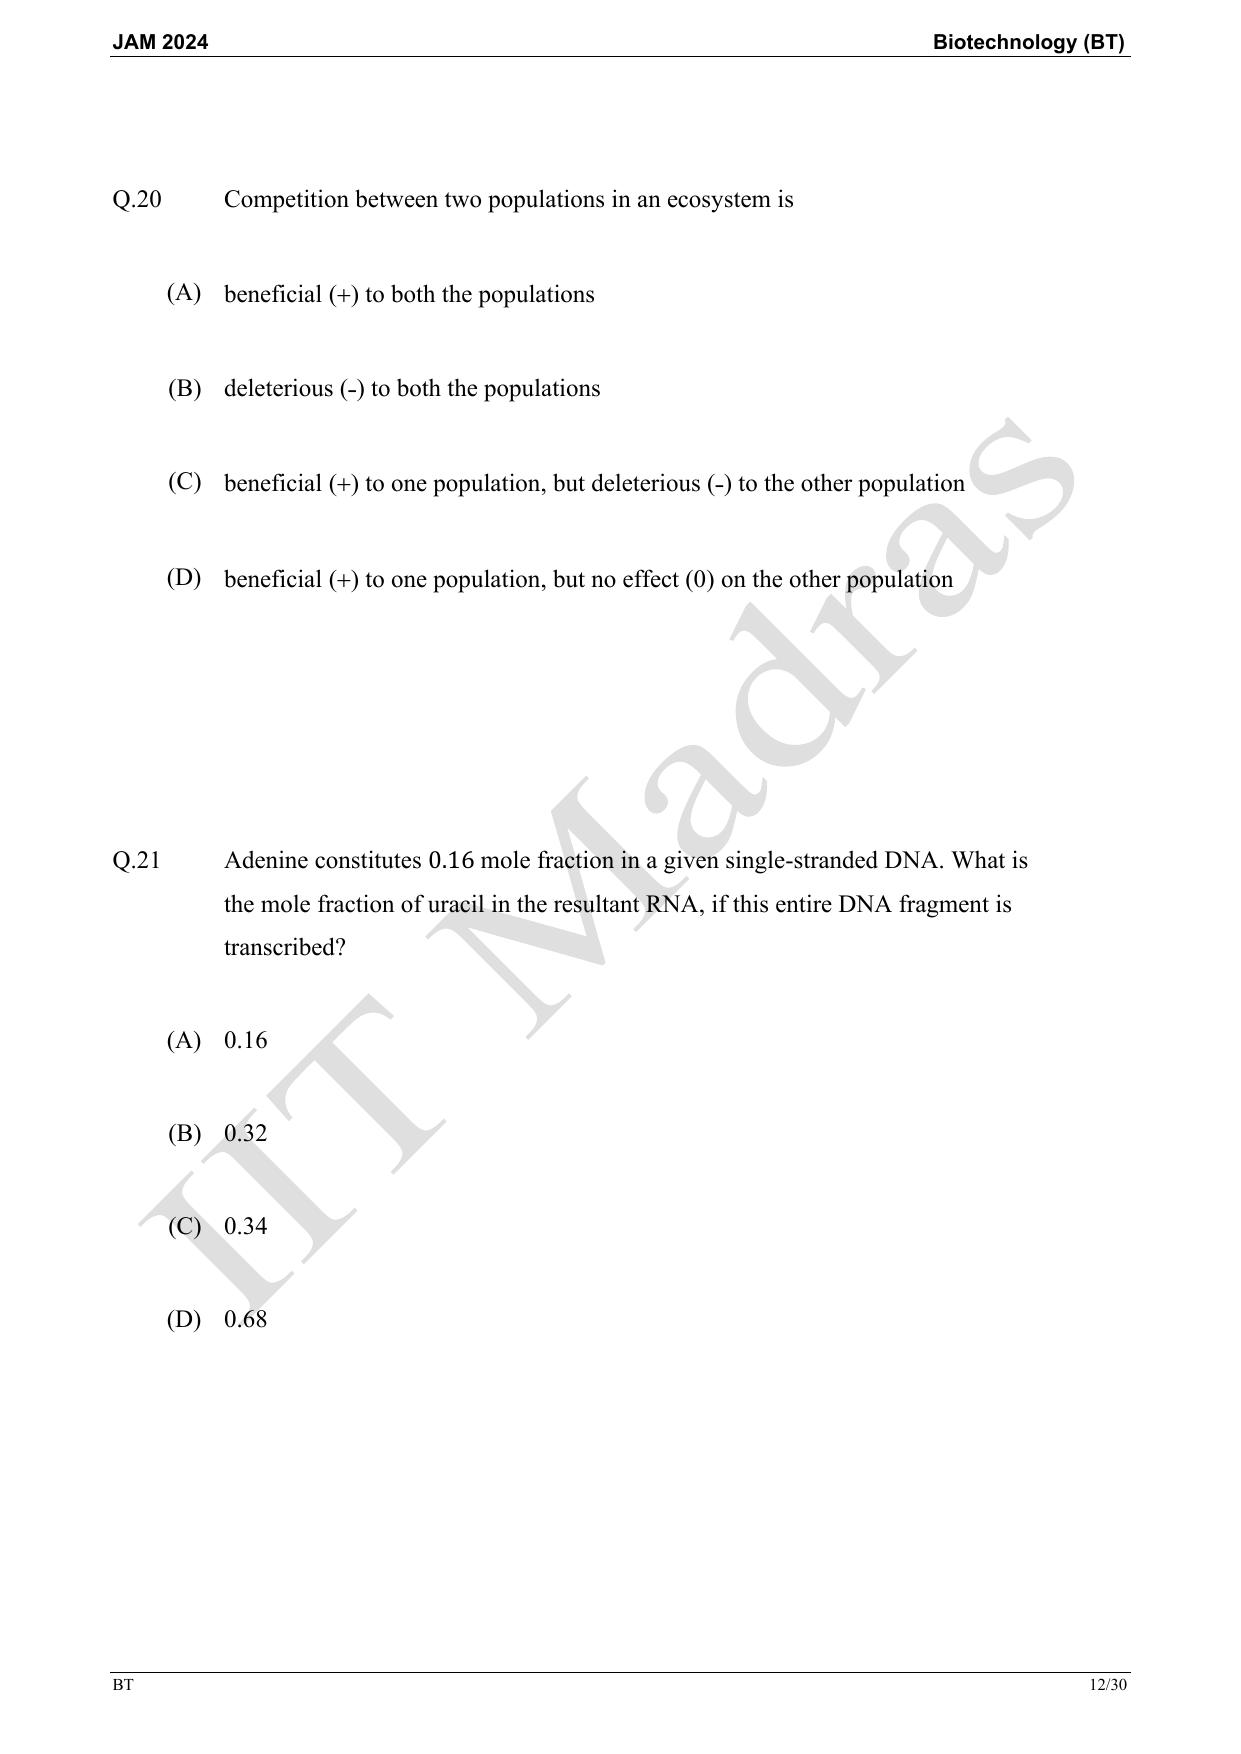 IIT JAM 2024 Biotechnology (BT) Master Question Paper - Page 12